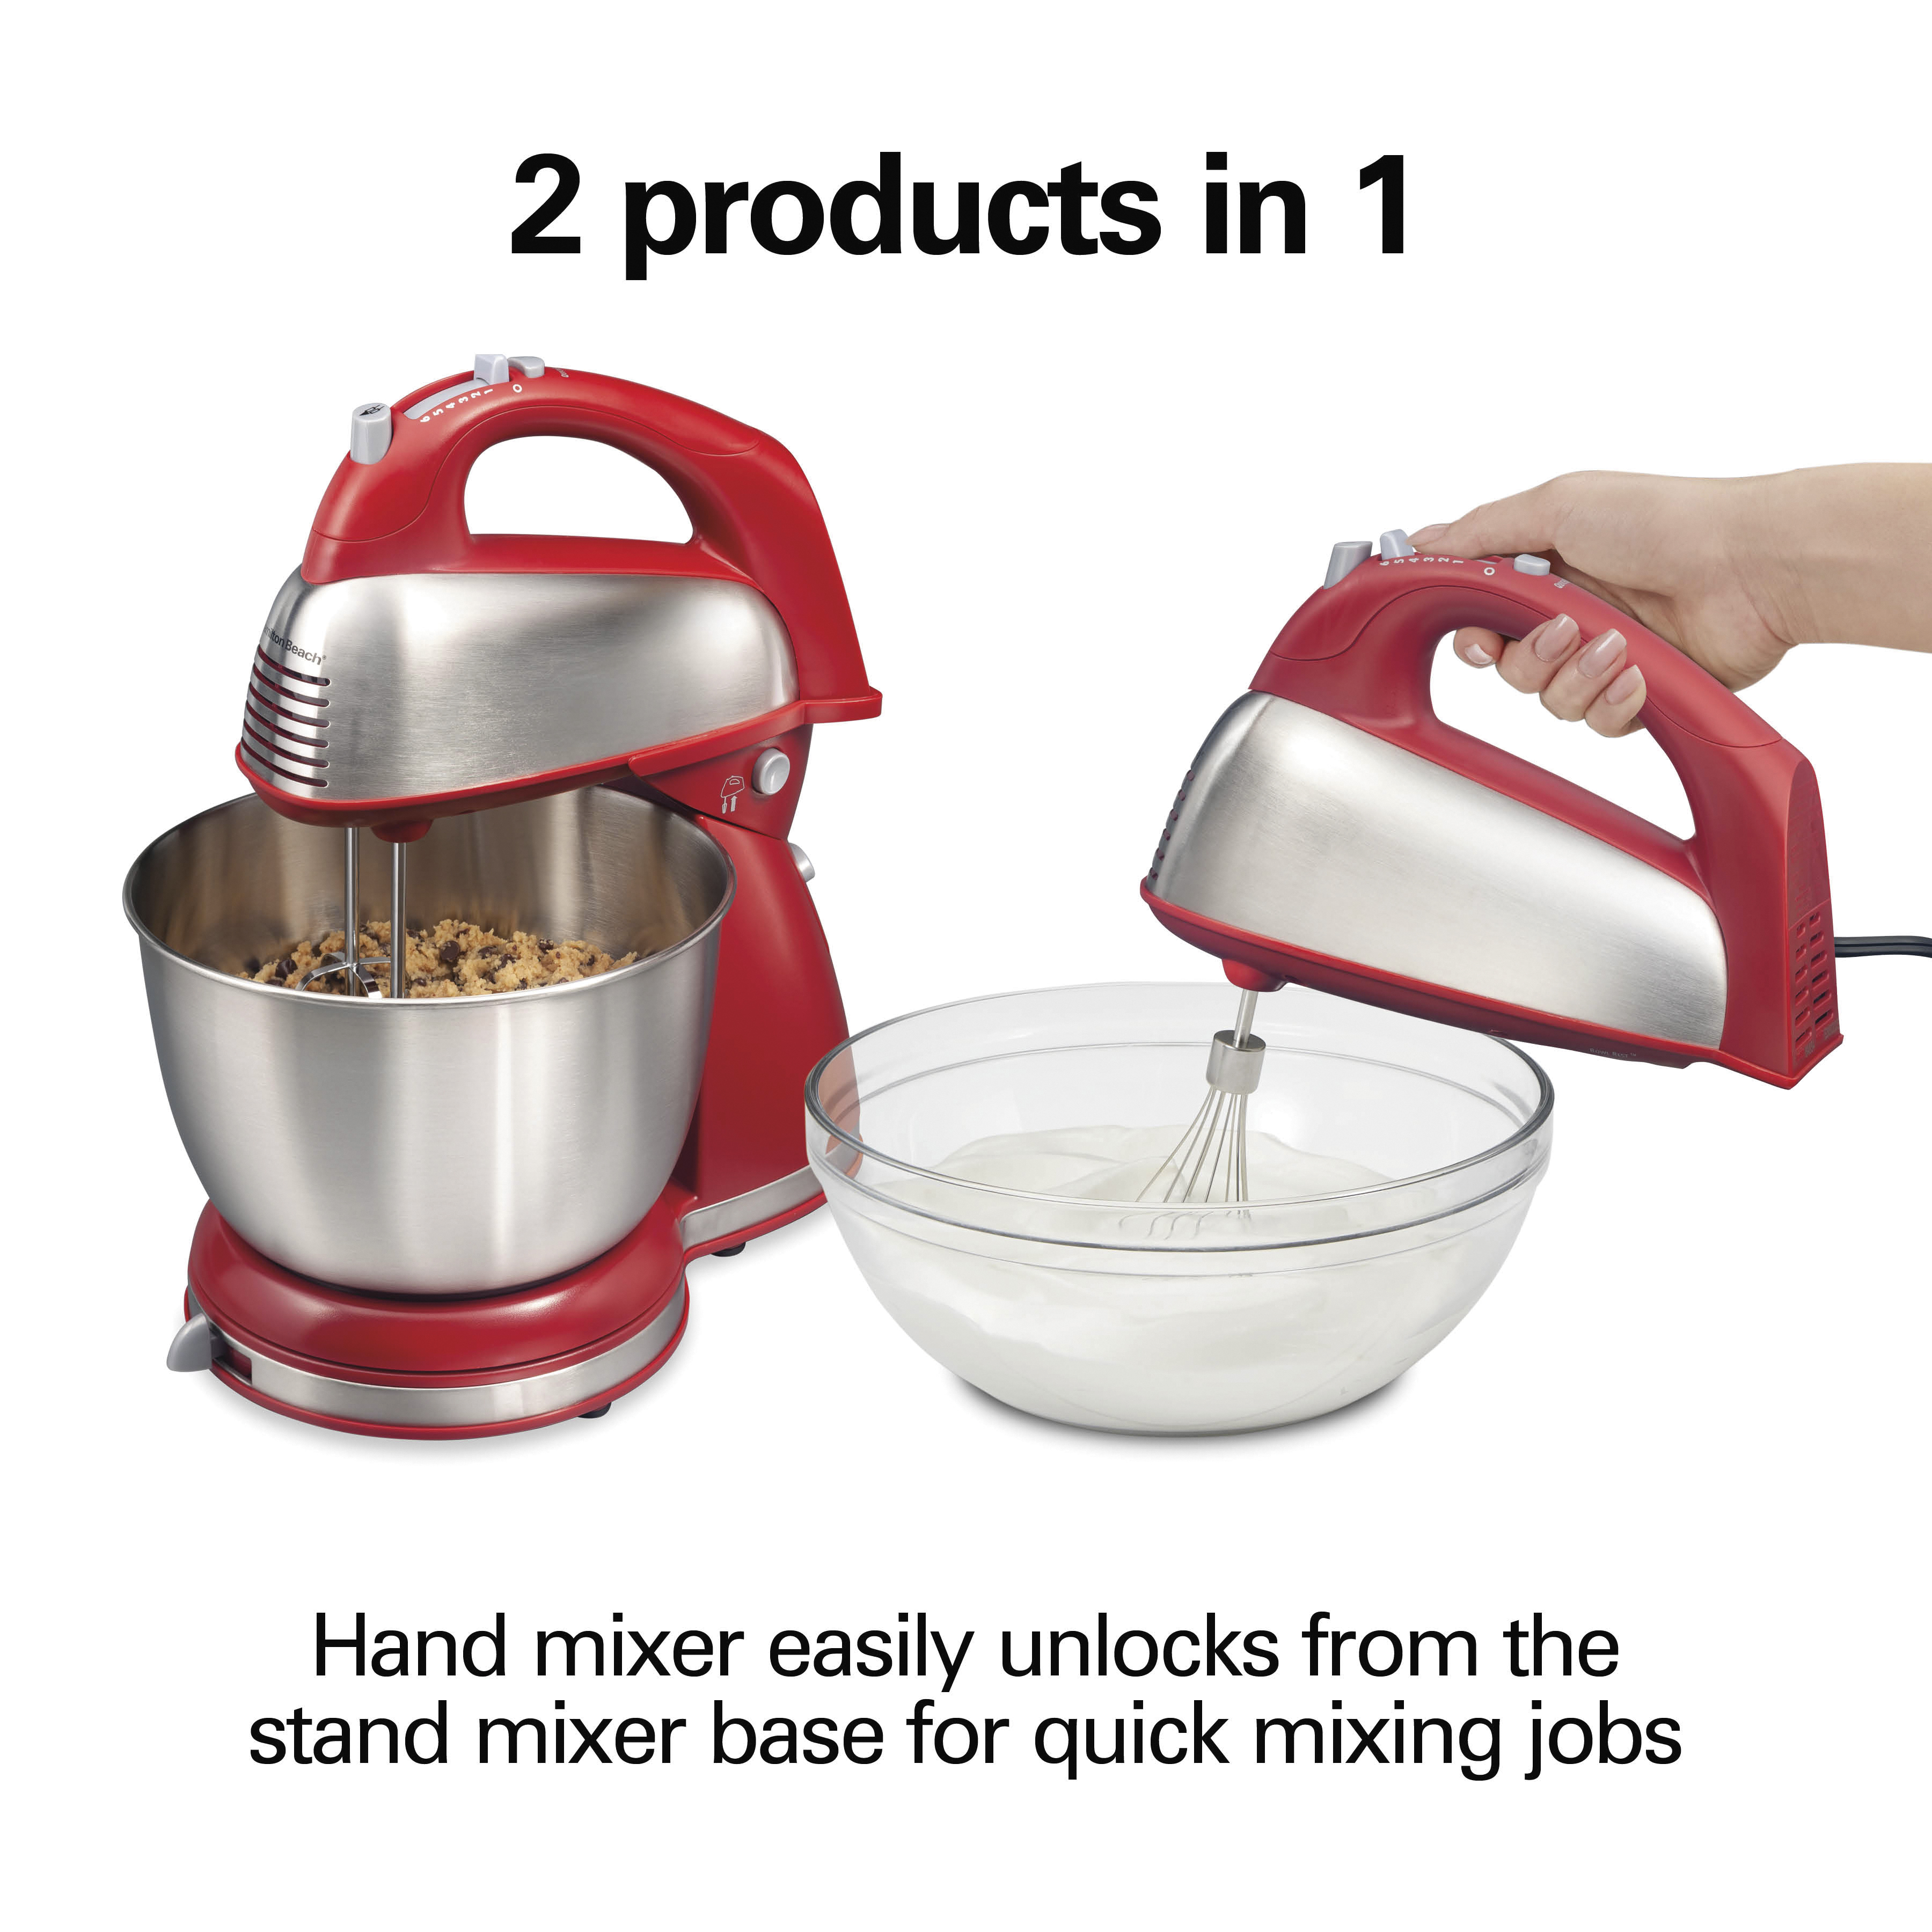 Hamilton Beach Classic Stand and Hand Mixer, 4 Quart Stainless Steel Bowl, 6 Speeds with Quick Burst, Red, 64654 - image 2 of 8